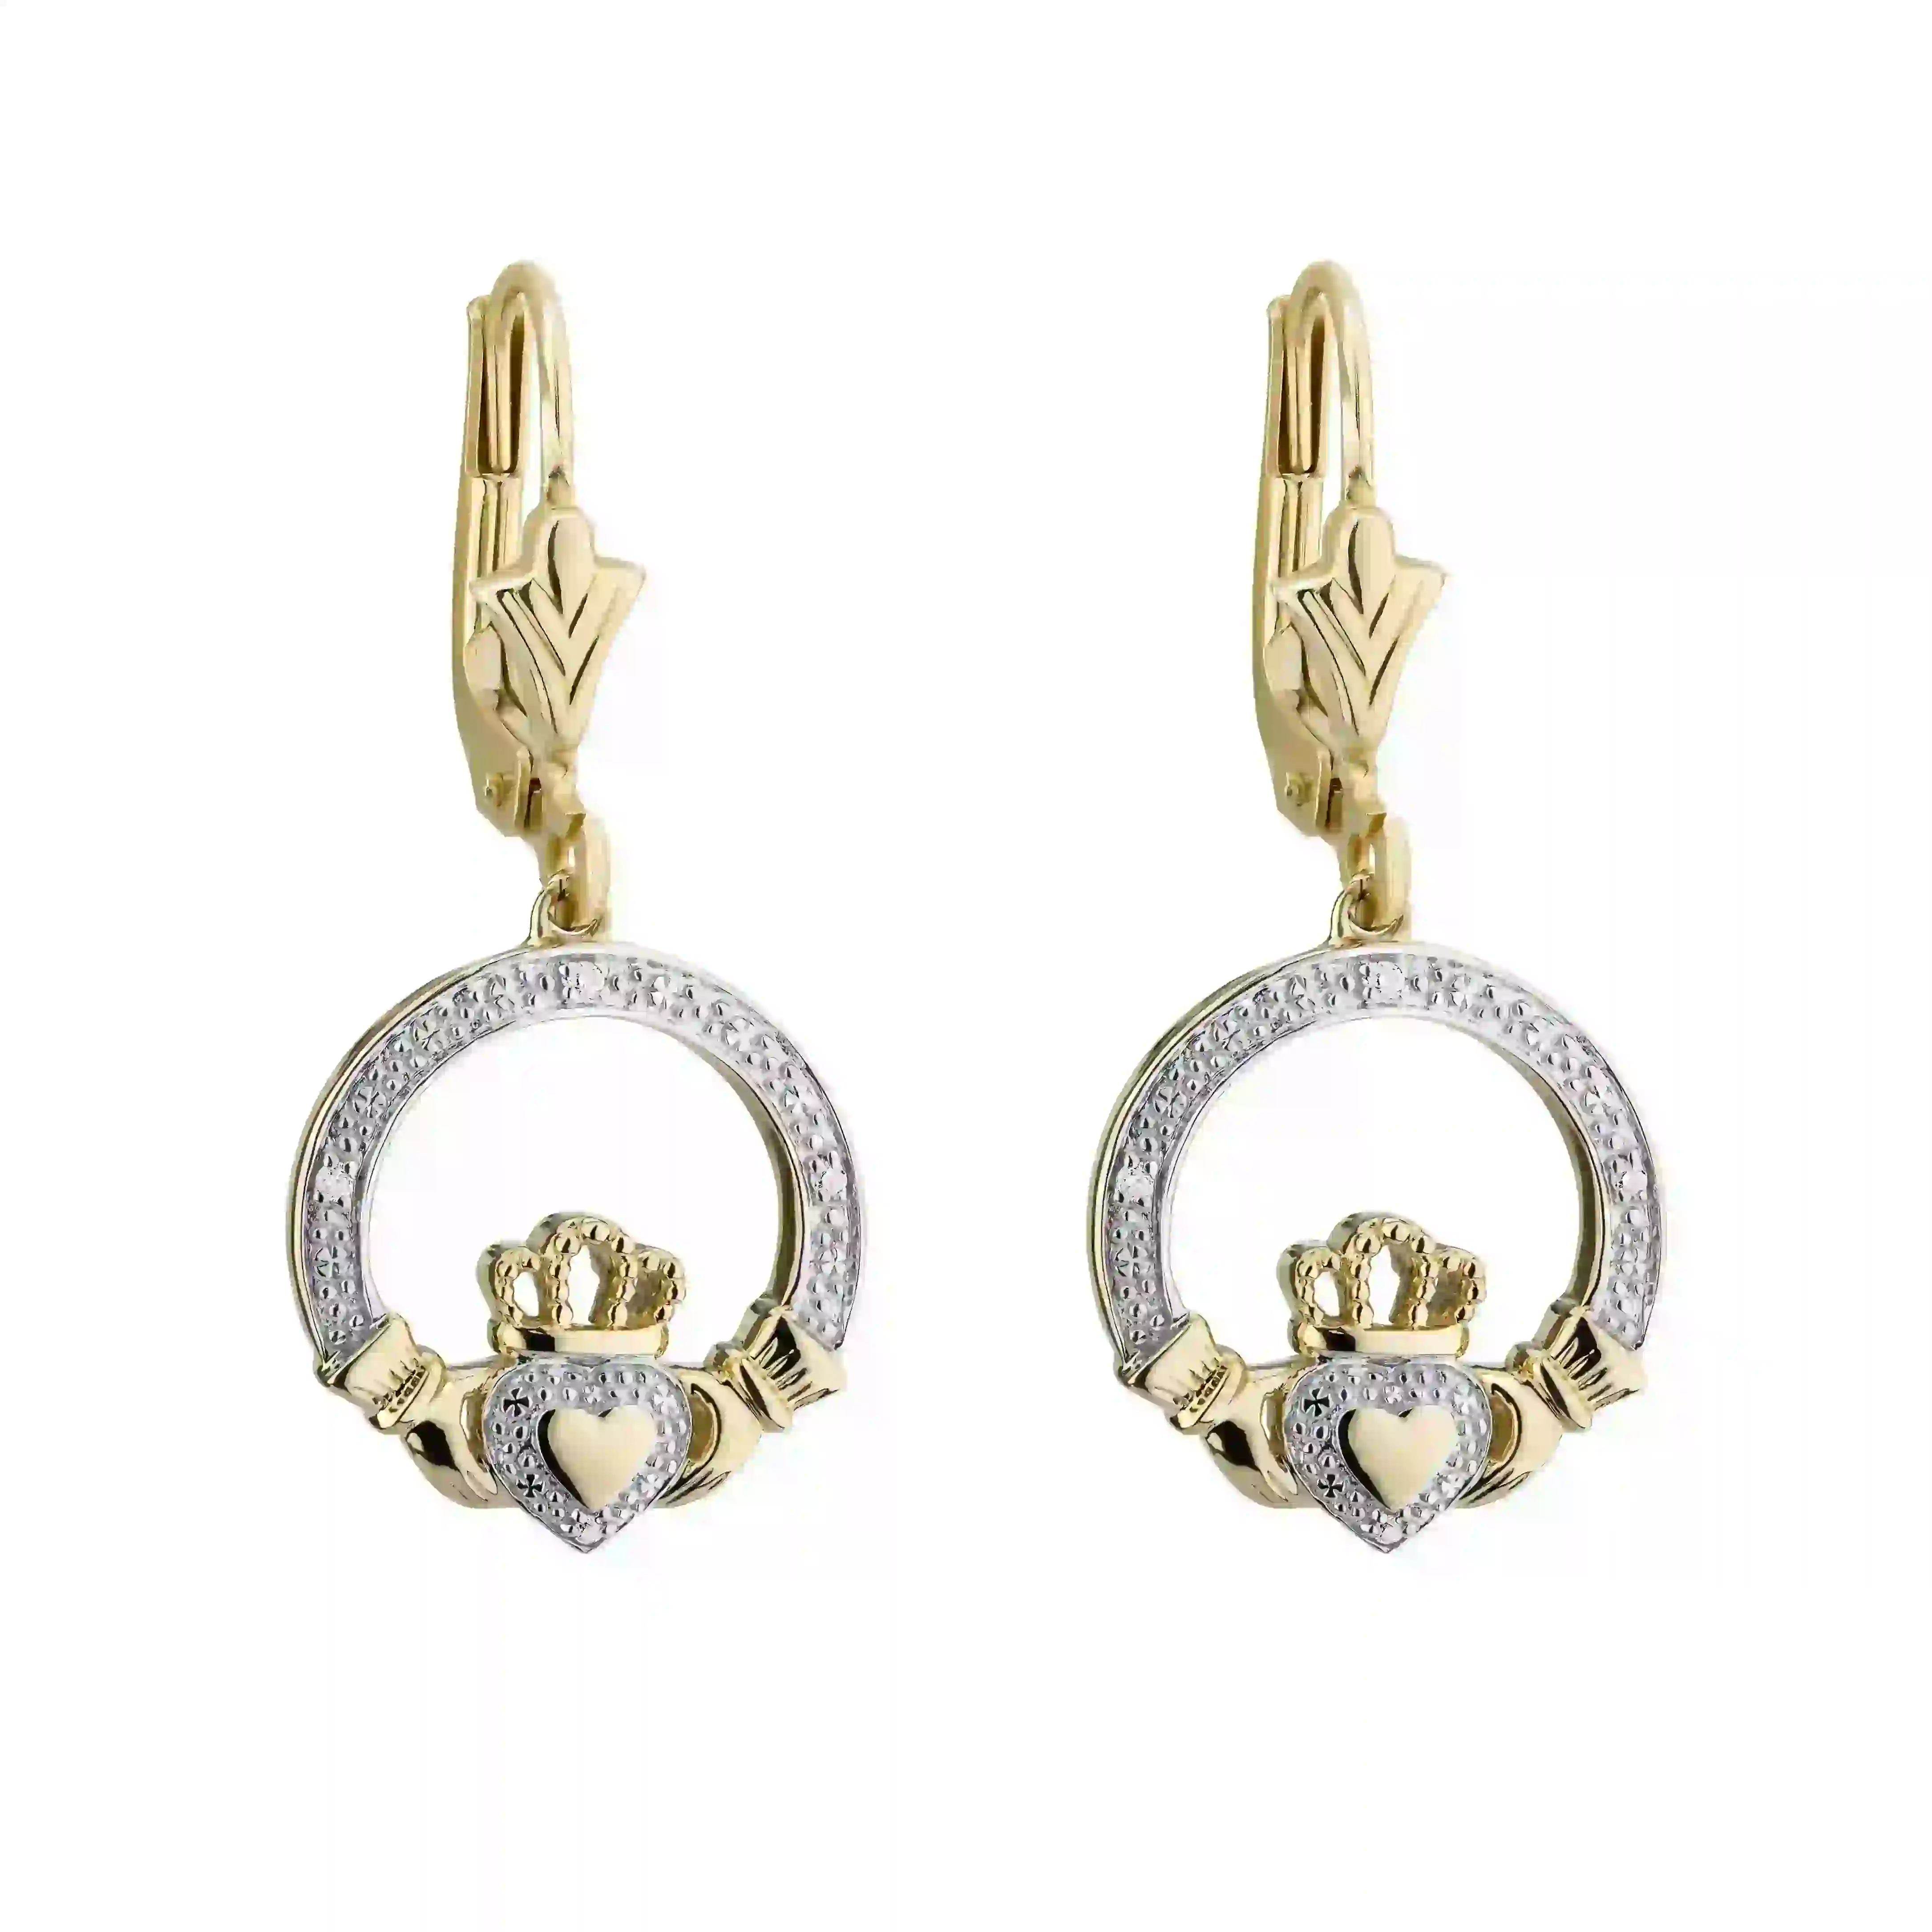 10k Gold Claddagh Drop Earrings With 0.02 ct Diamonds...